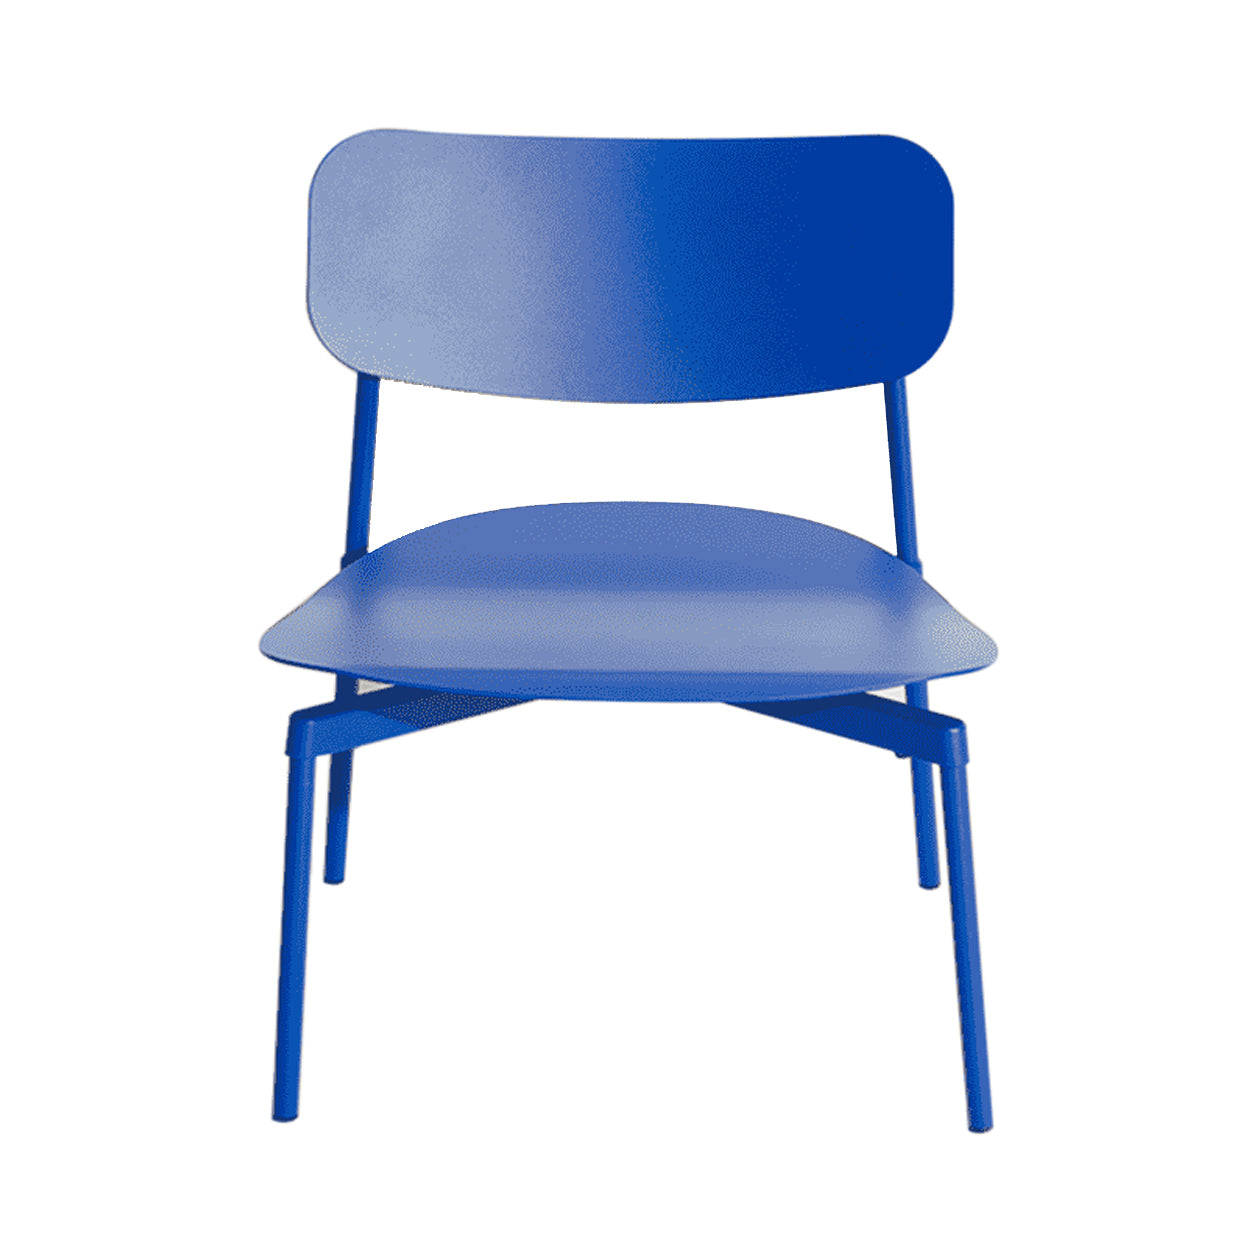 Fromme Stacking Lounge Chair: Blue